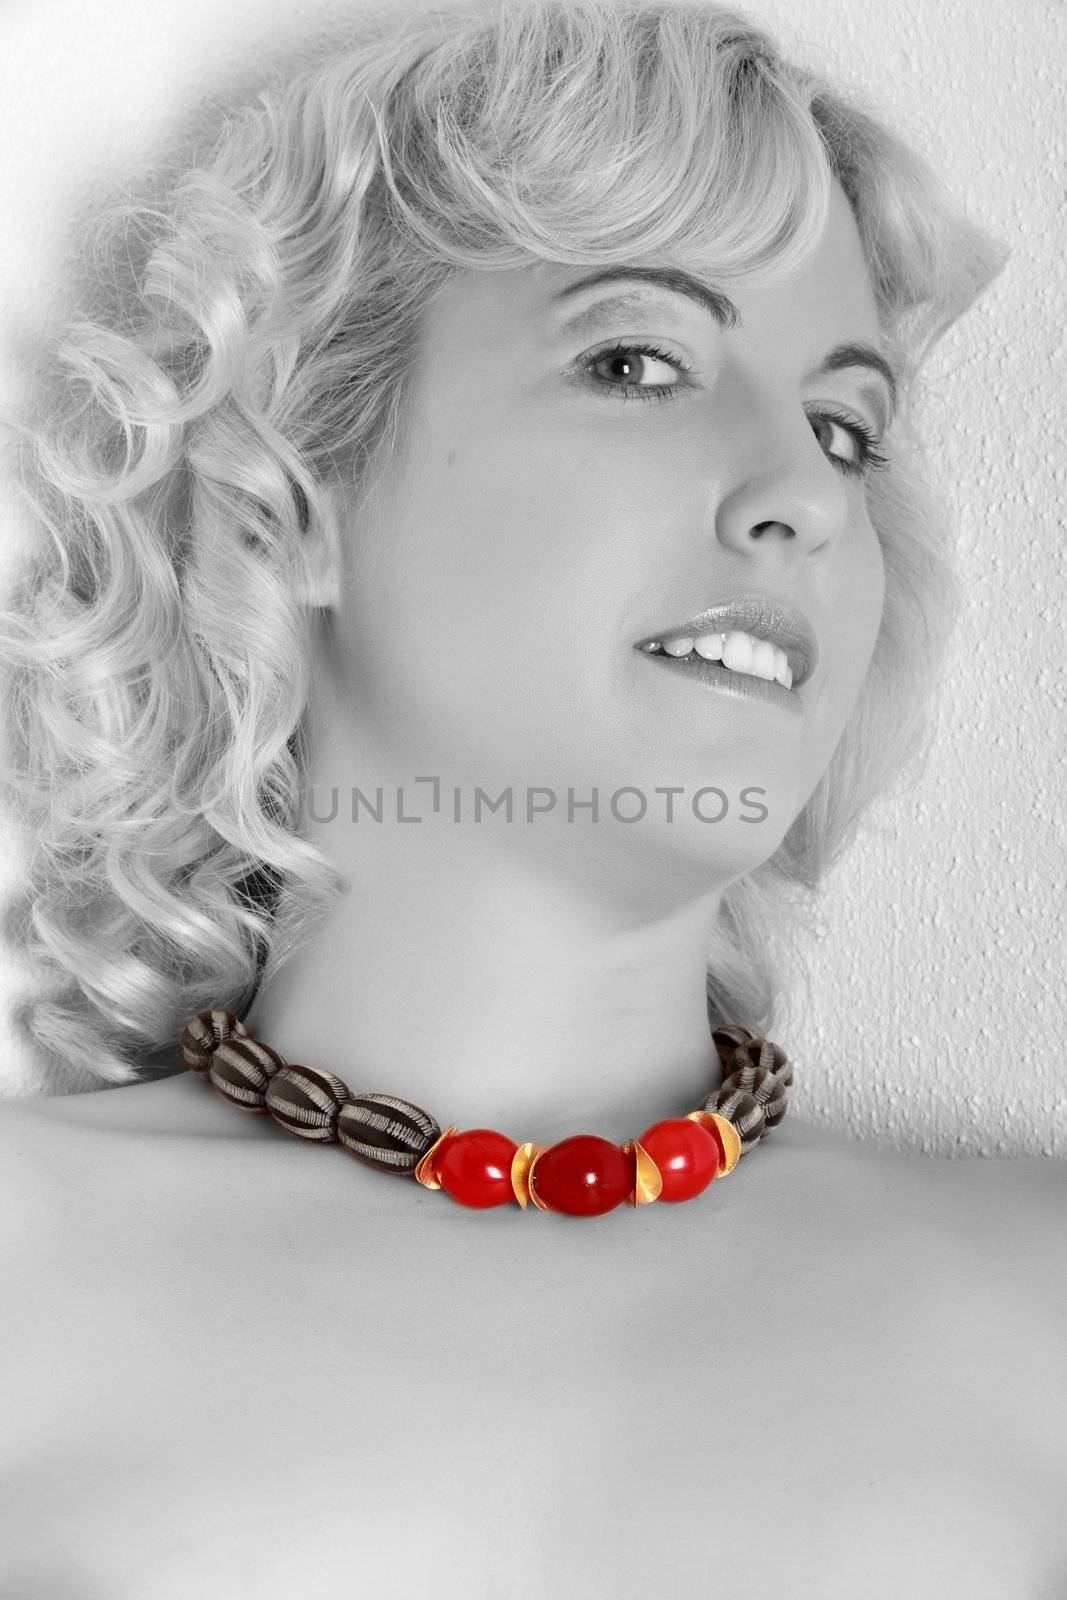 Illustrated erotic jewelry by STphotography